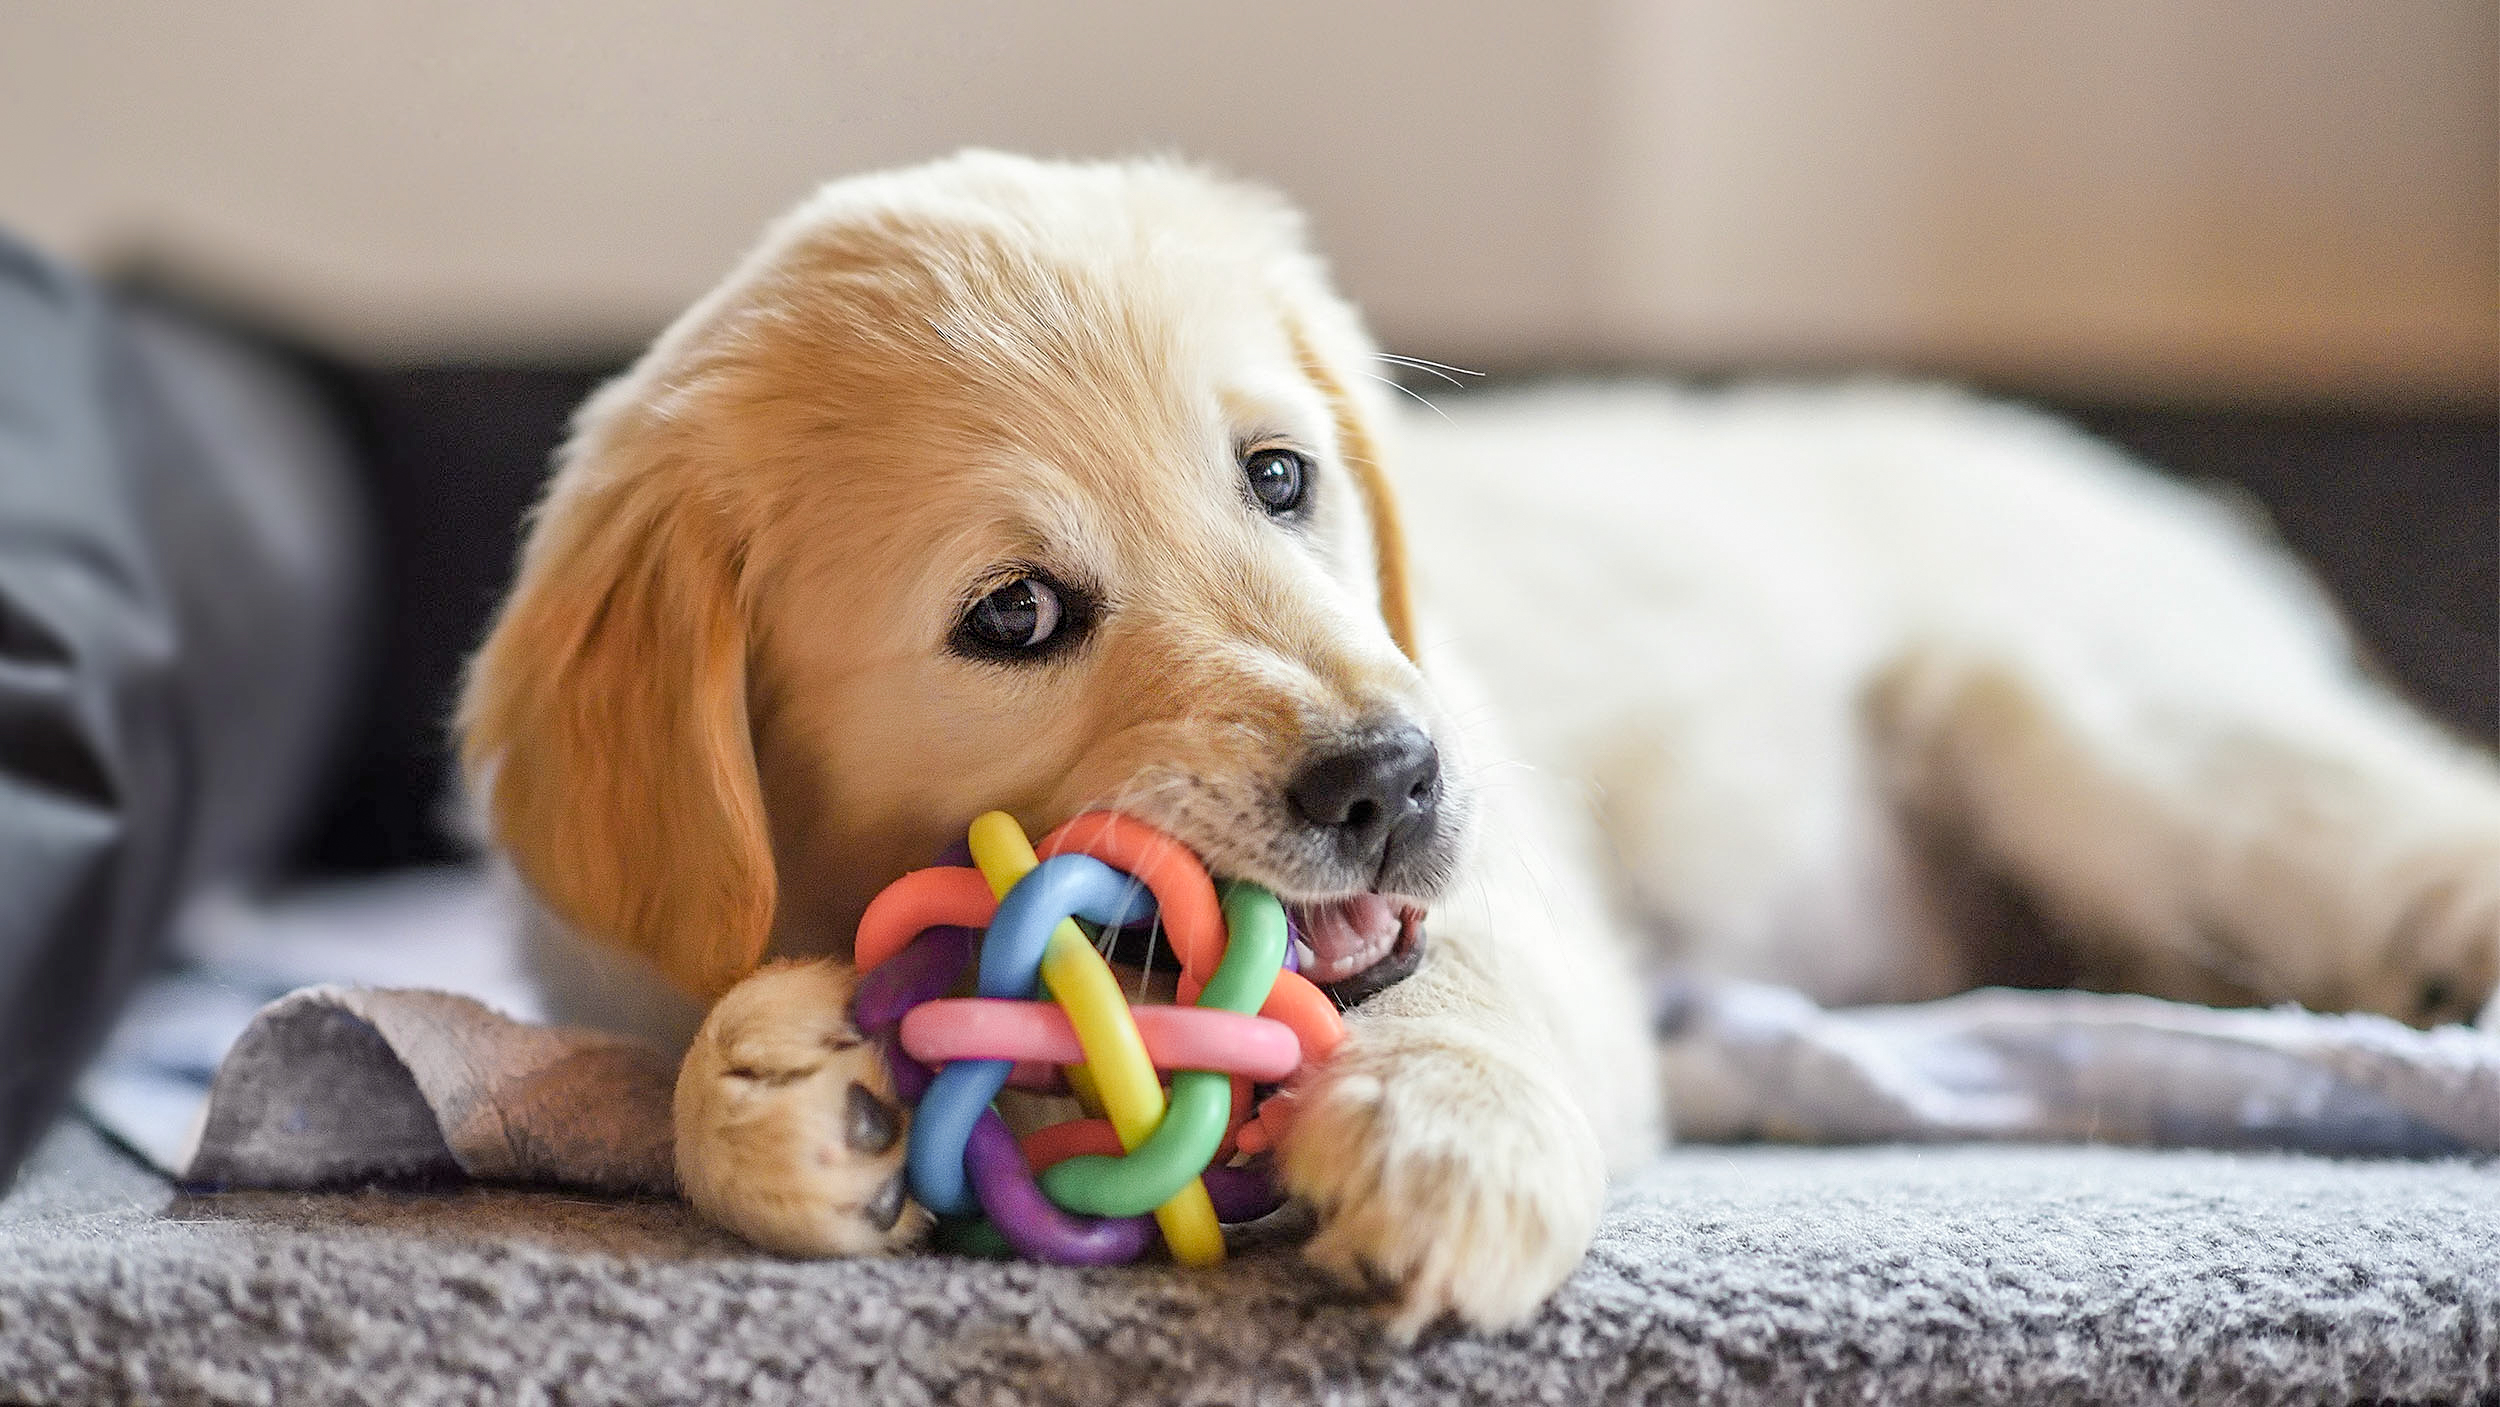 Puppy Golden Retriever lying down inside while chewing a toy.